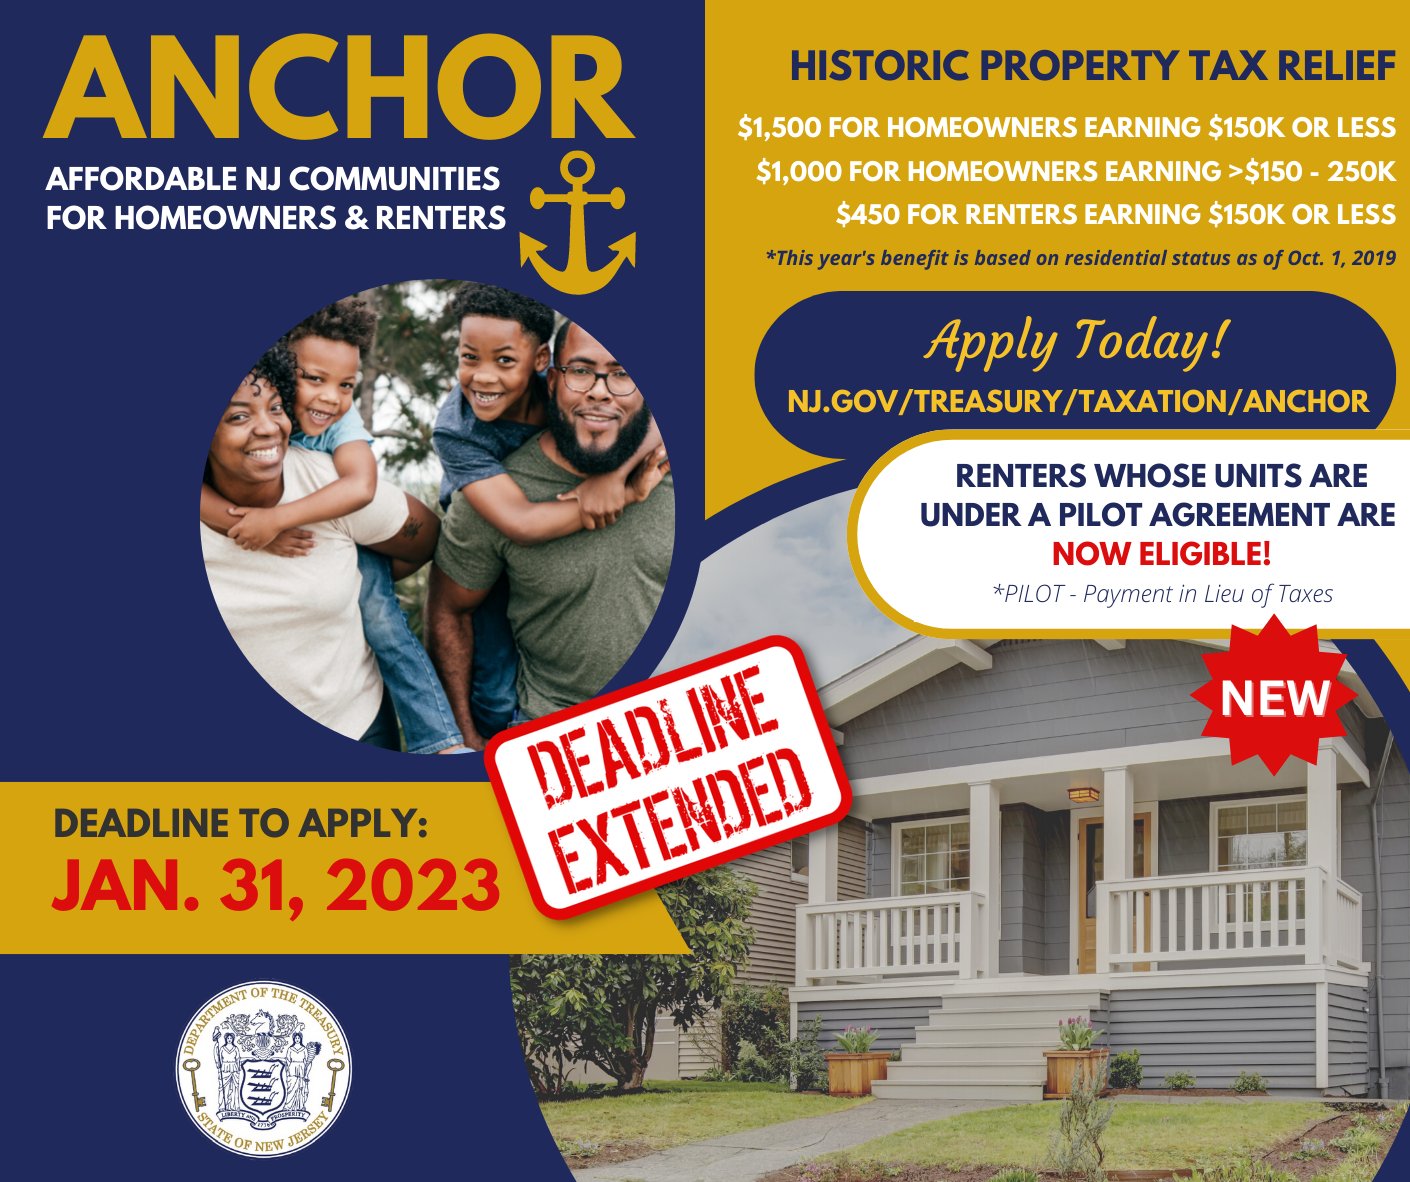 Ewing New Jersey ANCHOR Property Tax Relief Program Deadline Extended